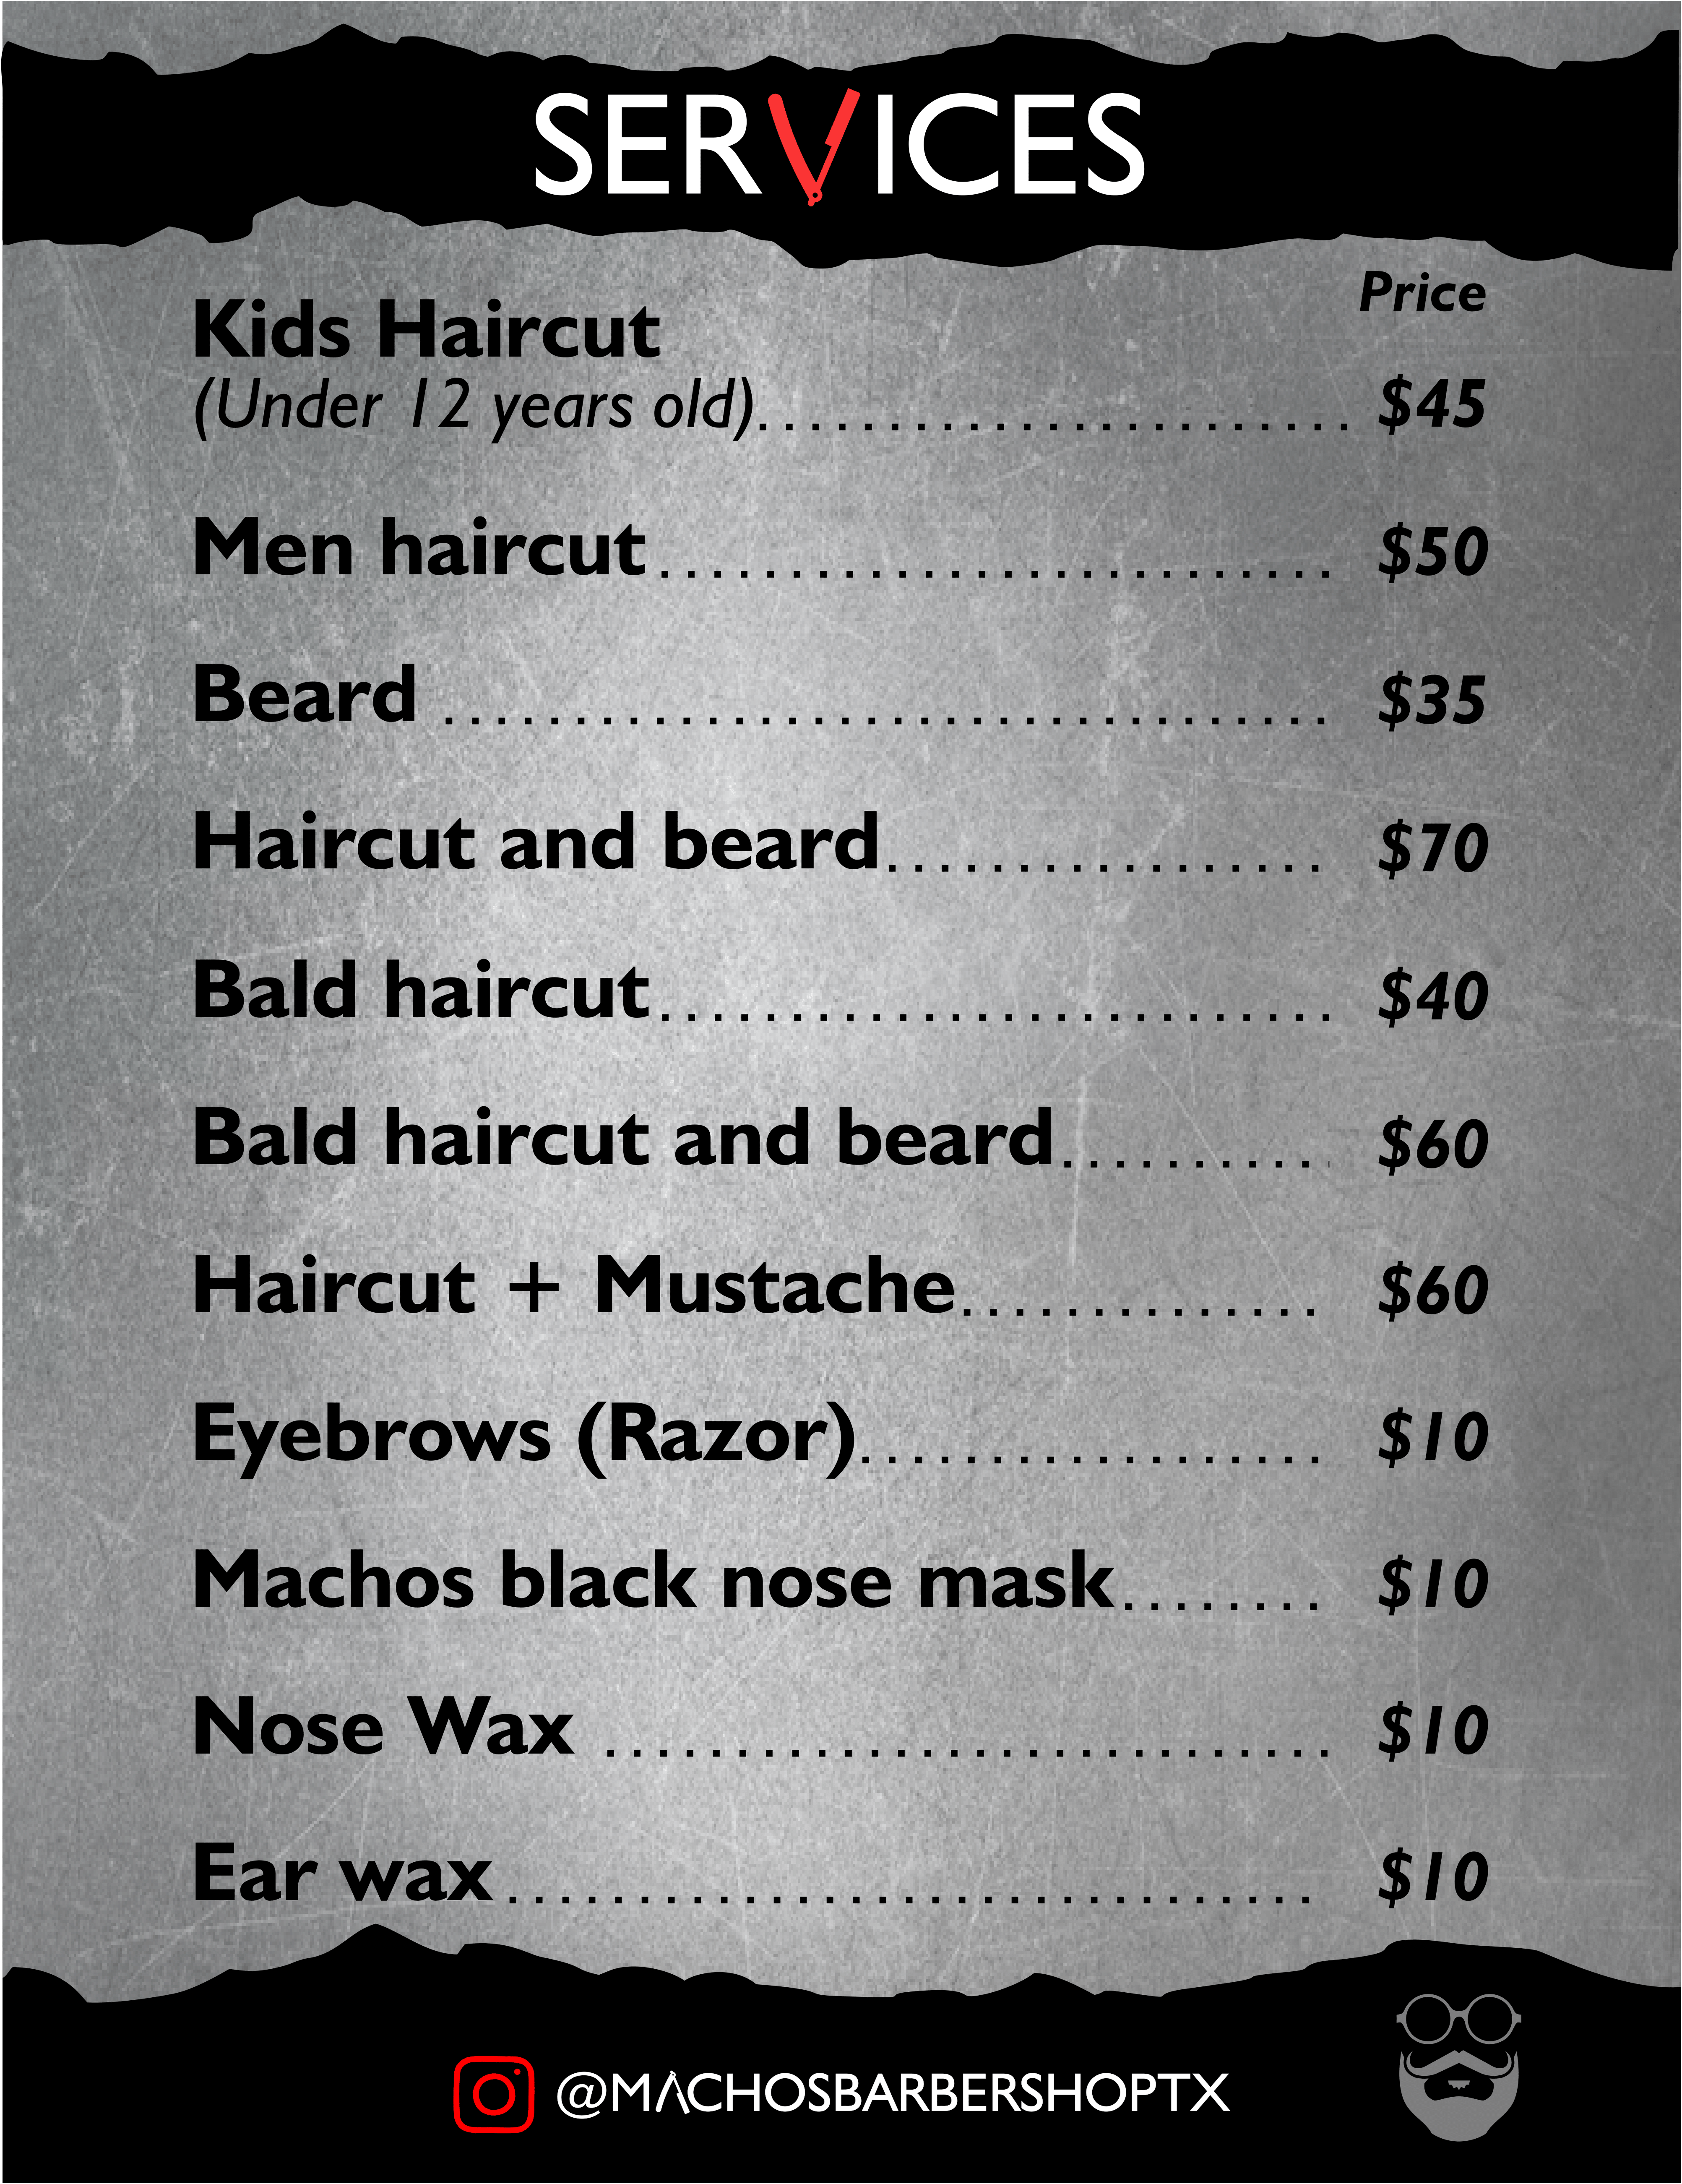 Prices and Services